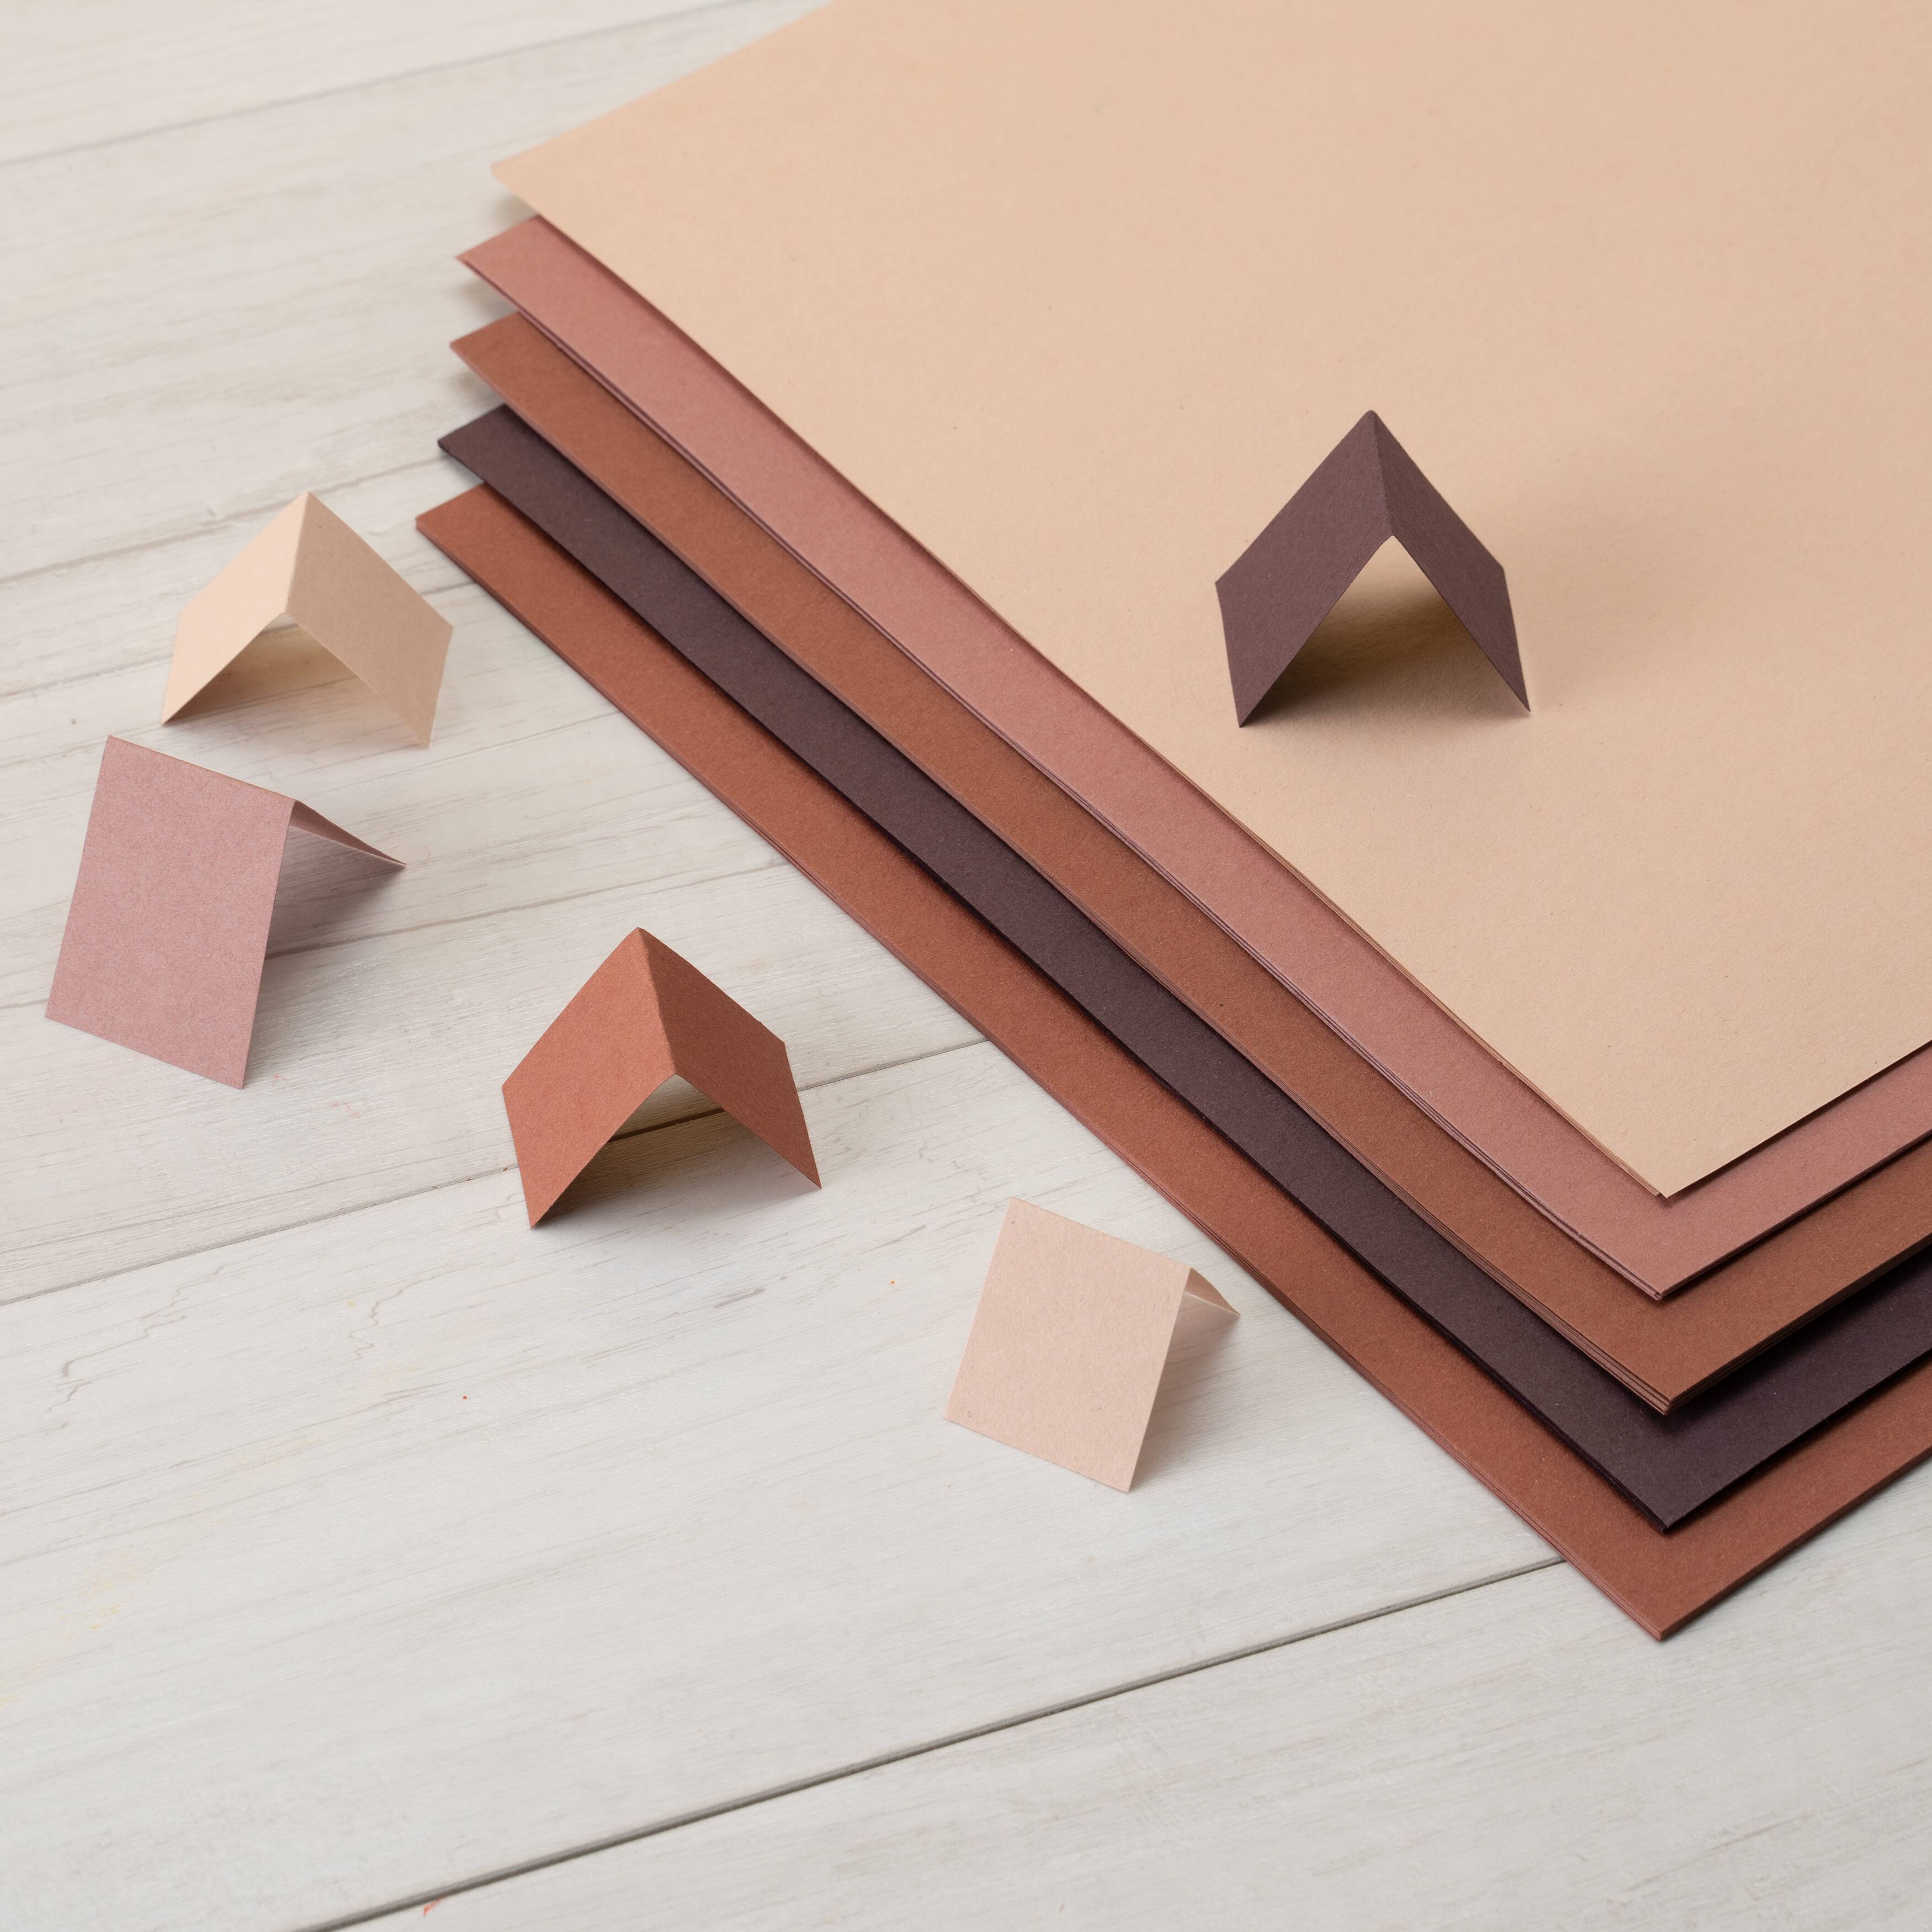 Skin Tone 9 x 12 Construction Paper by Creatology™, 50 sheets